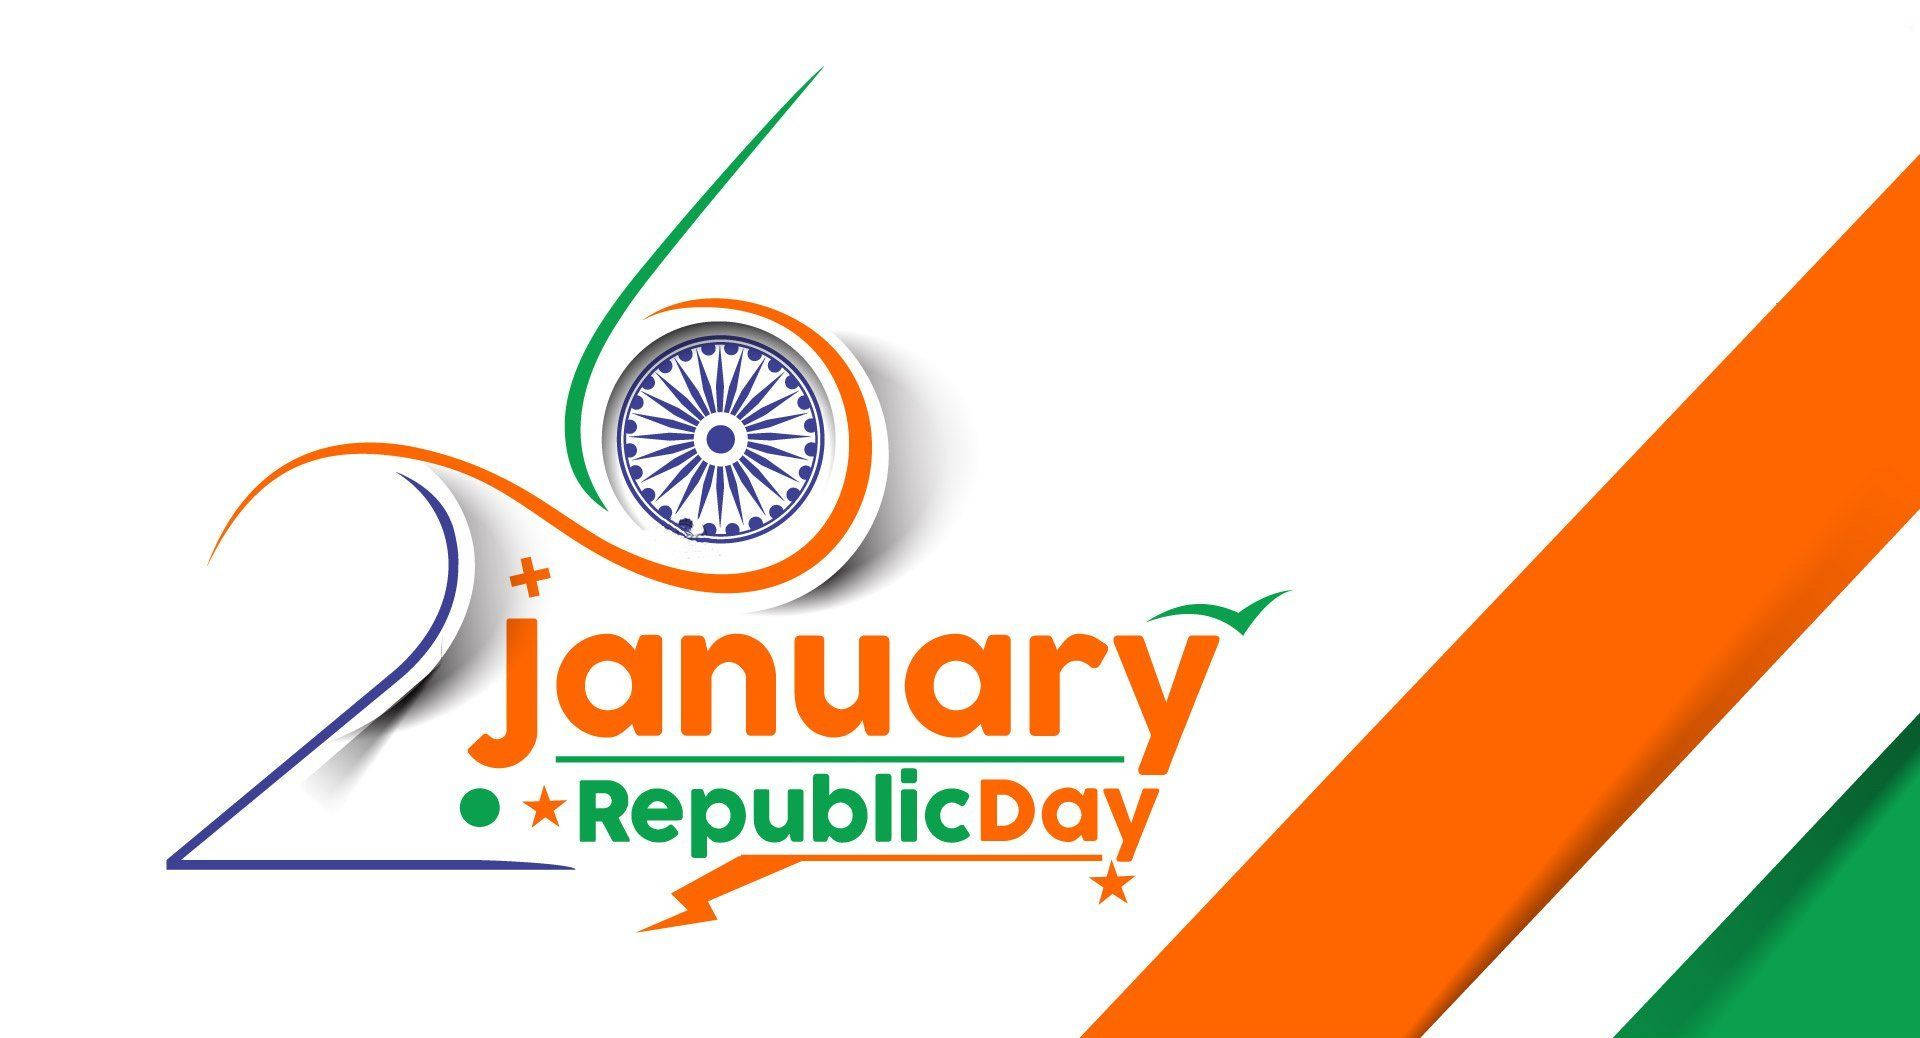 Simple India Republic Day 26 January Poster Design Background